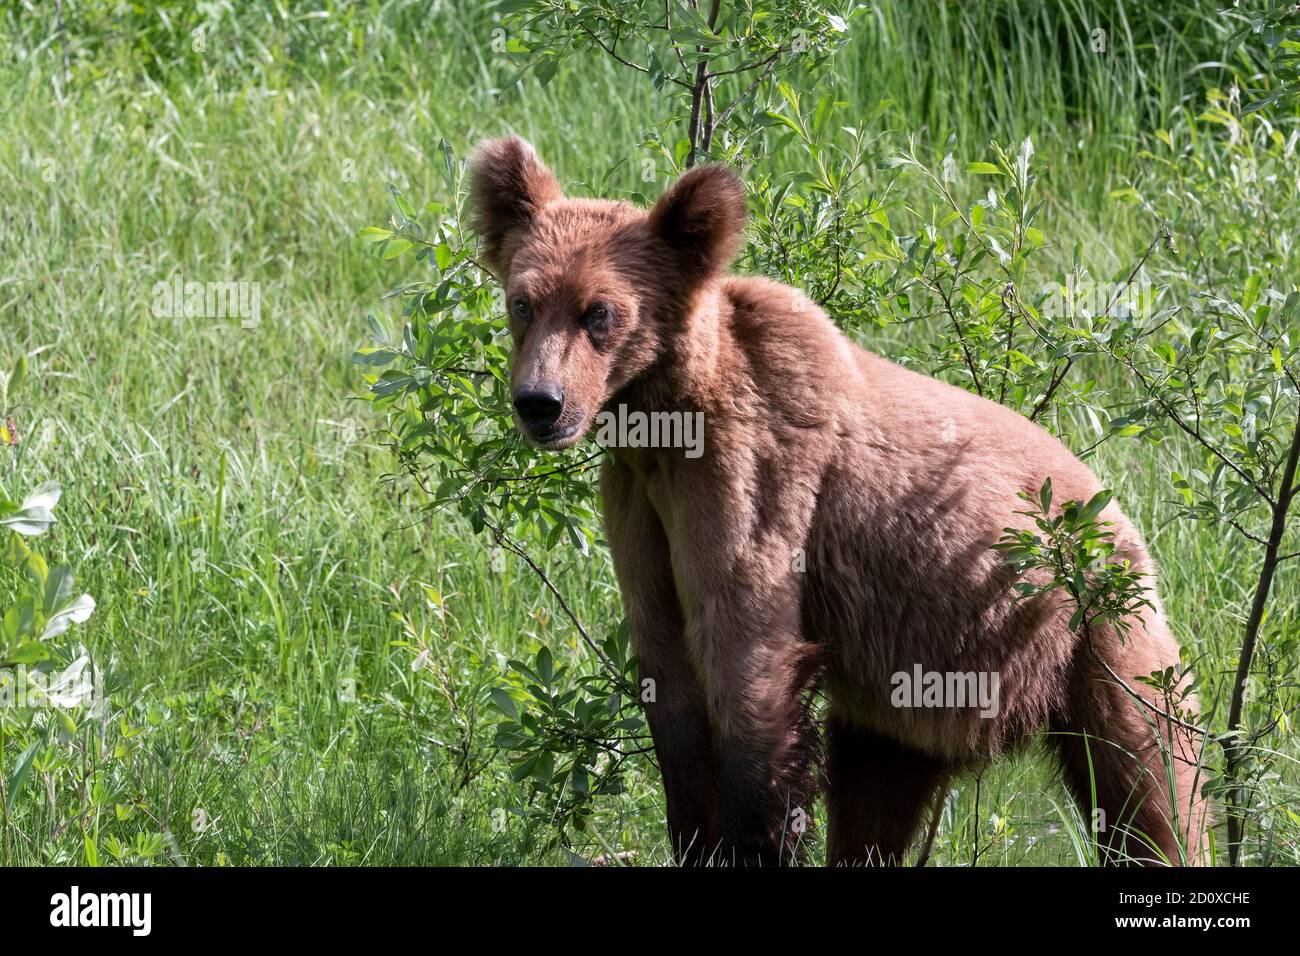 Grizzly cub in the spring vegetation, Khutzeymateen, BC Stock Photo